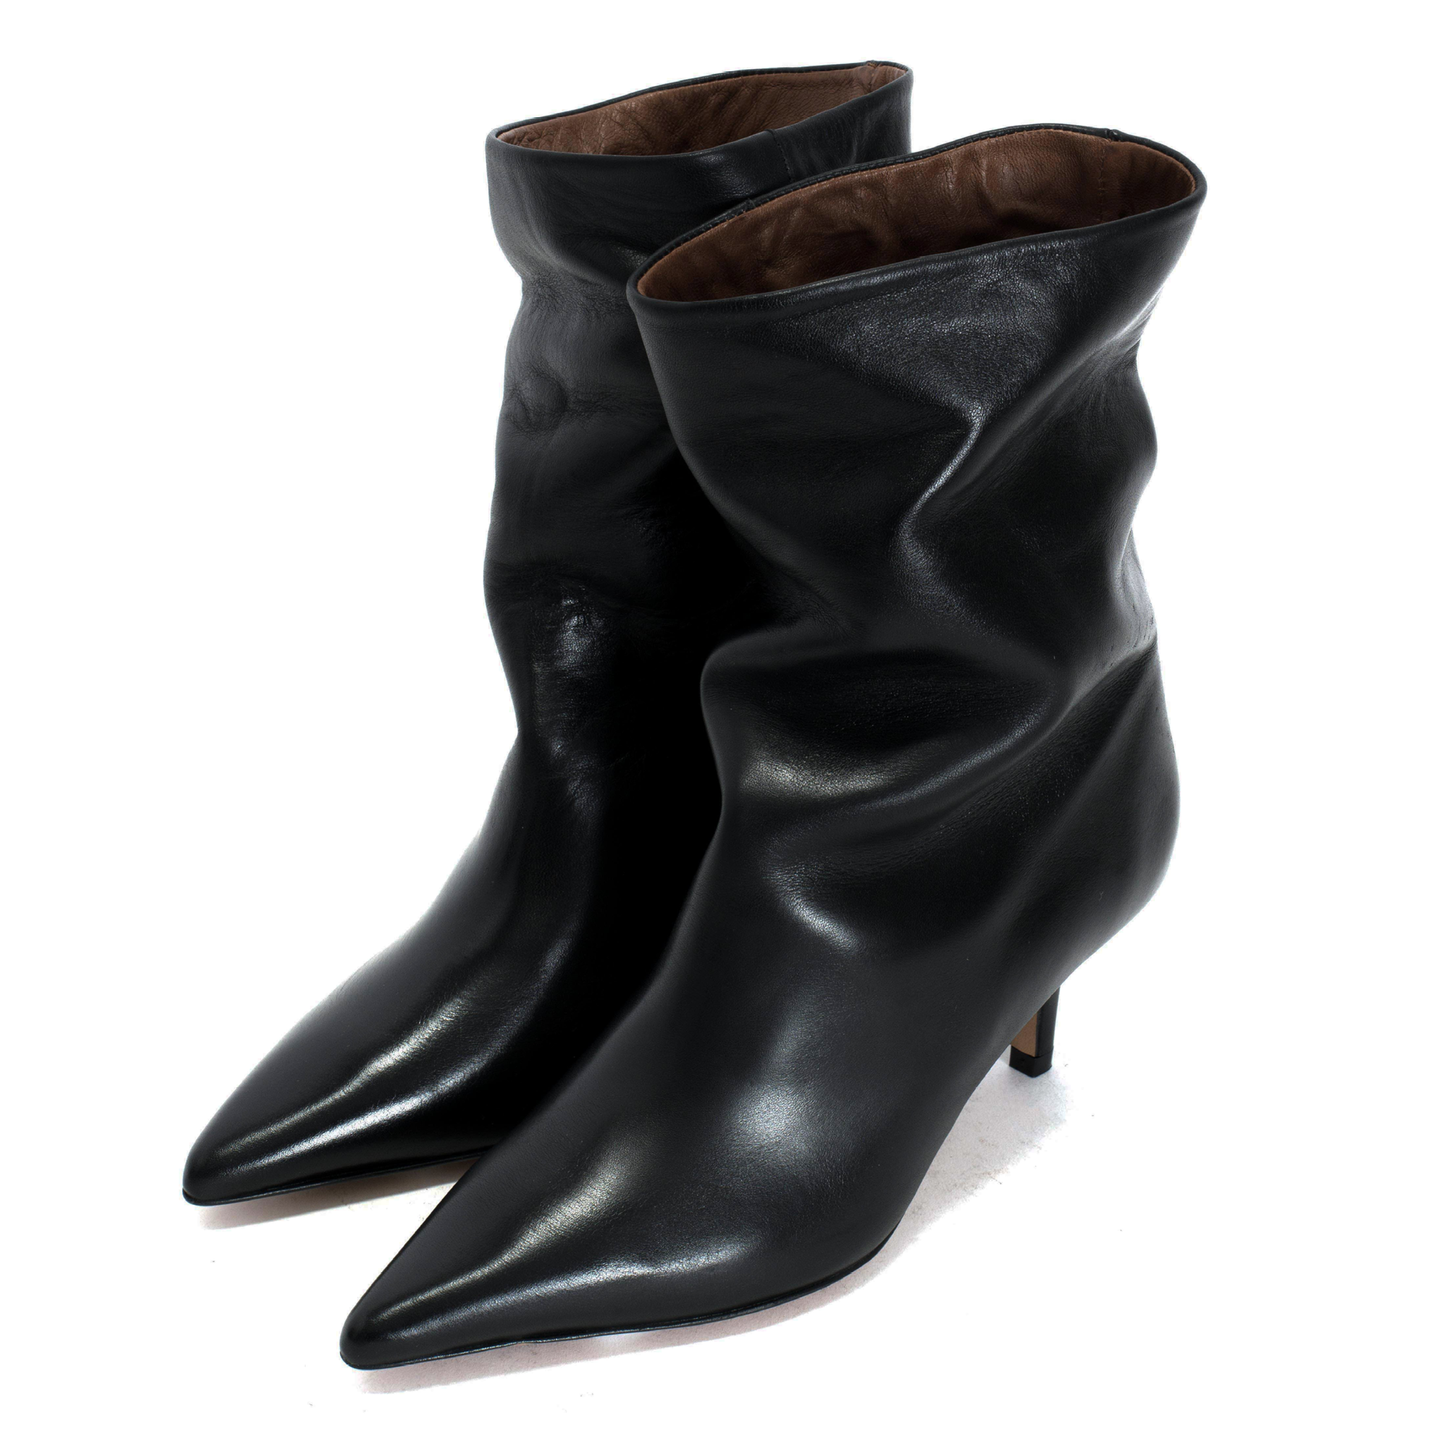 Vully 55 Boots, Black